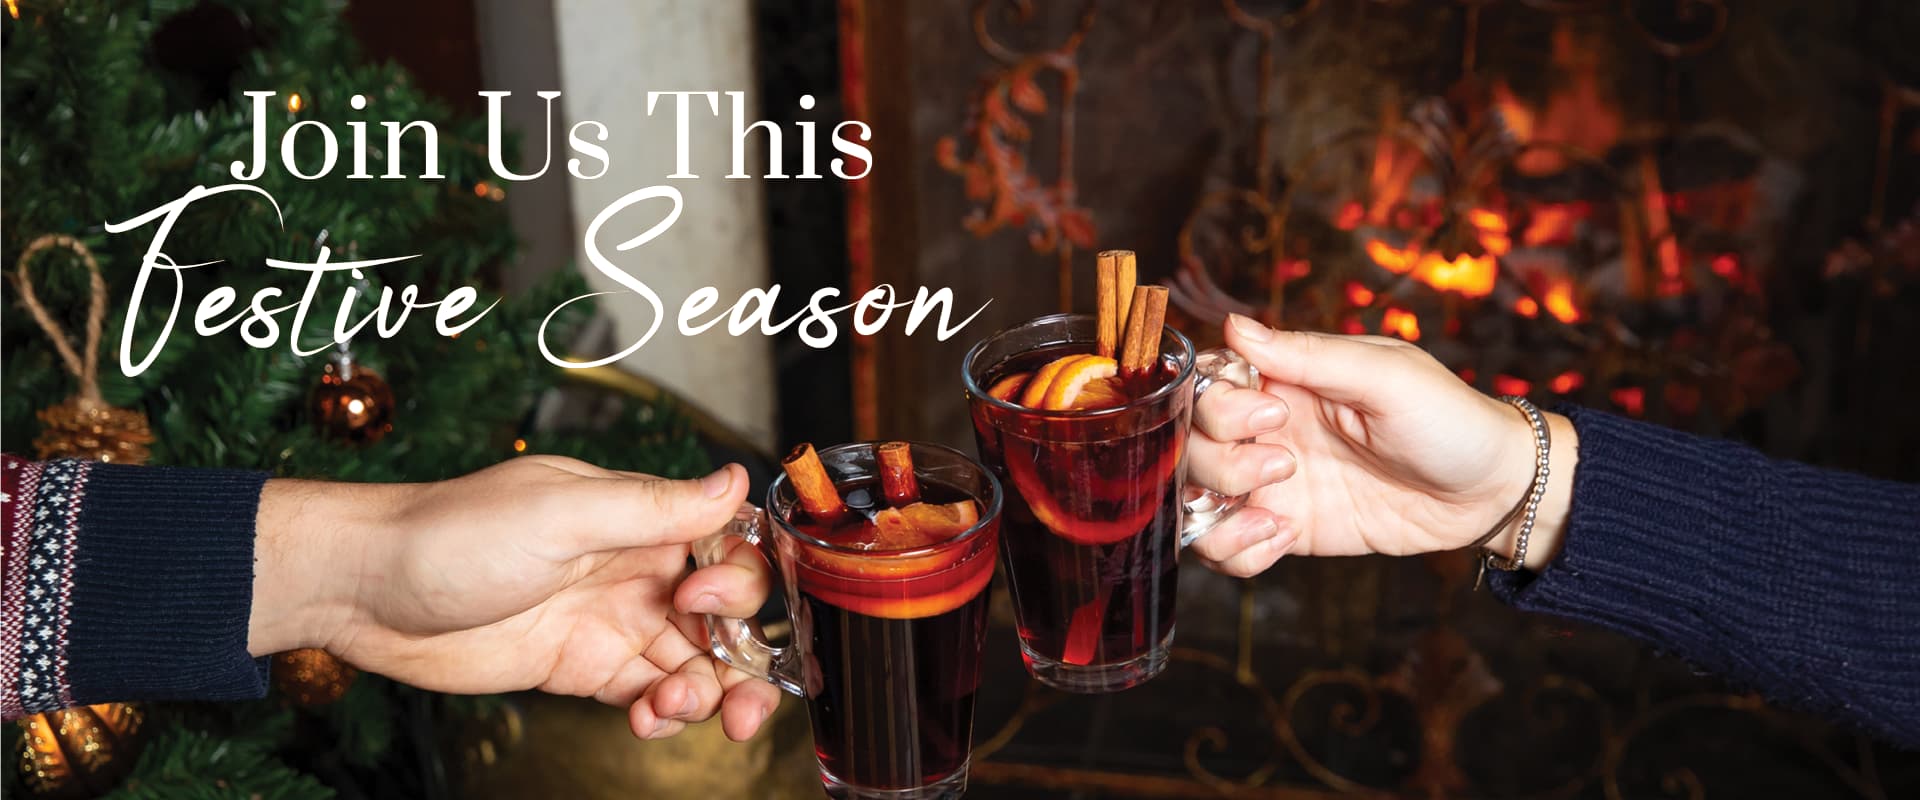 join us this festive season at The Angelic | Mulled Wine